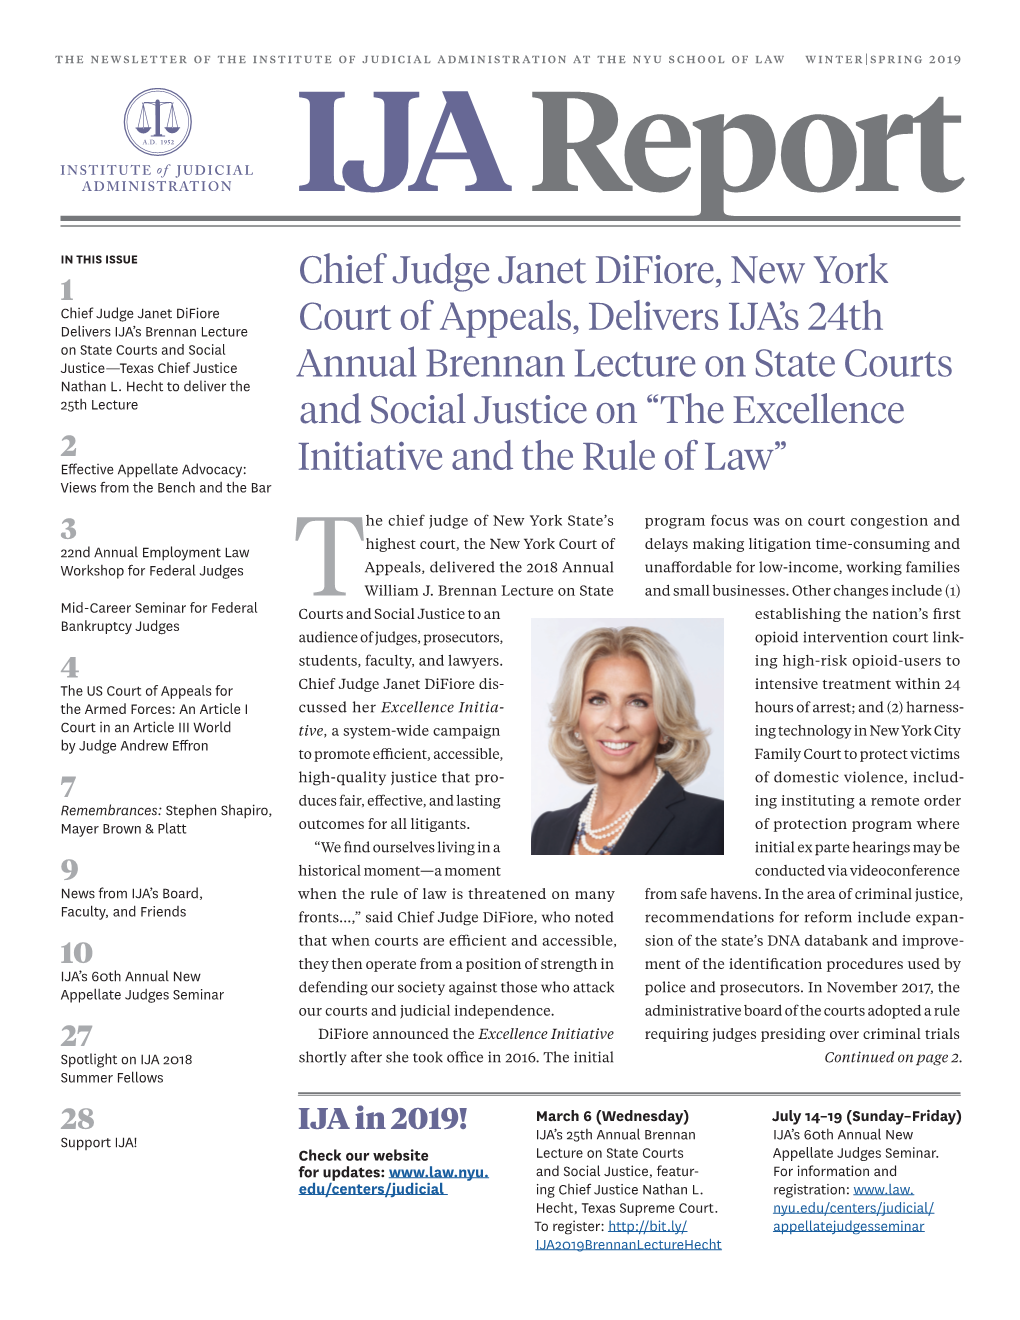 Chief Judge Janet Difiore, New York Court of Appeals, Delivers IJA's